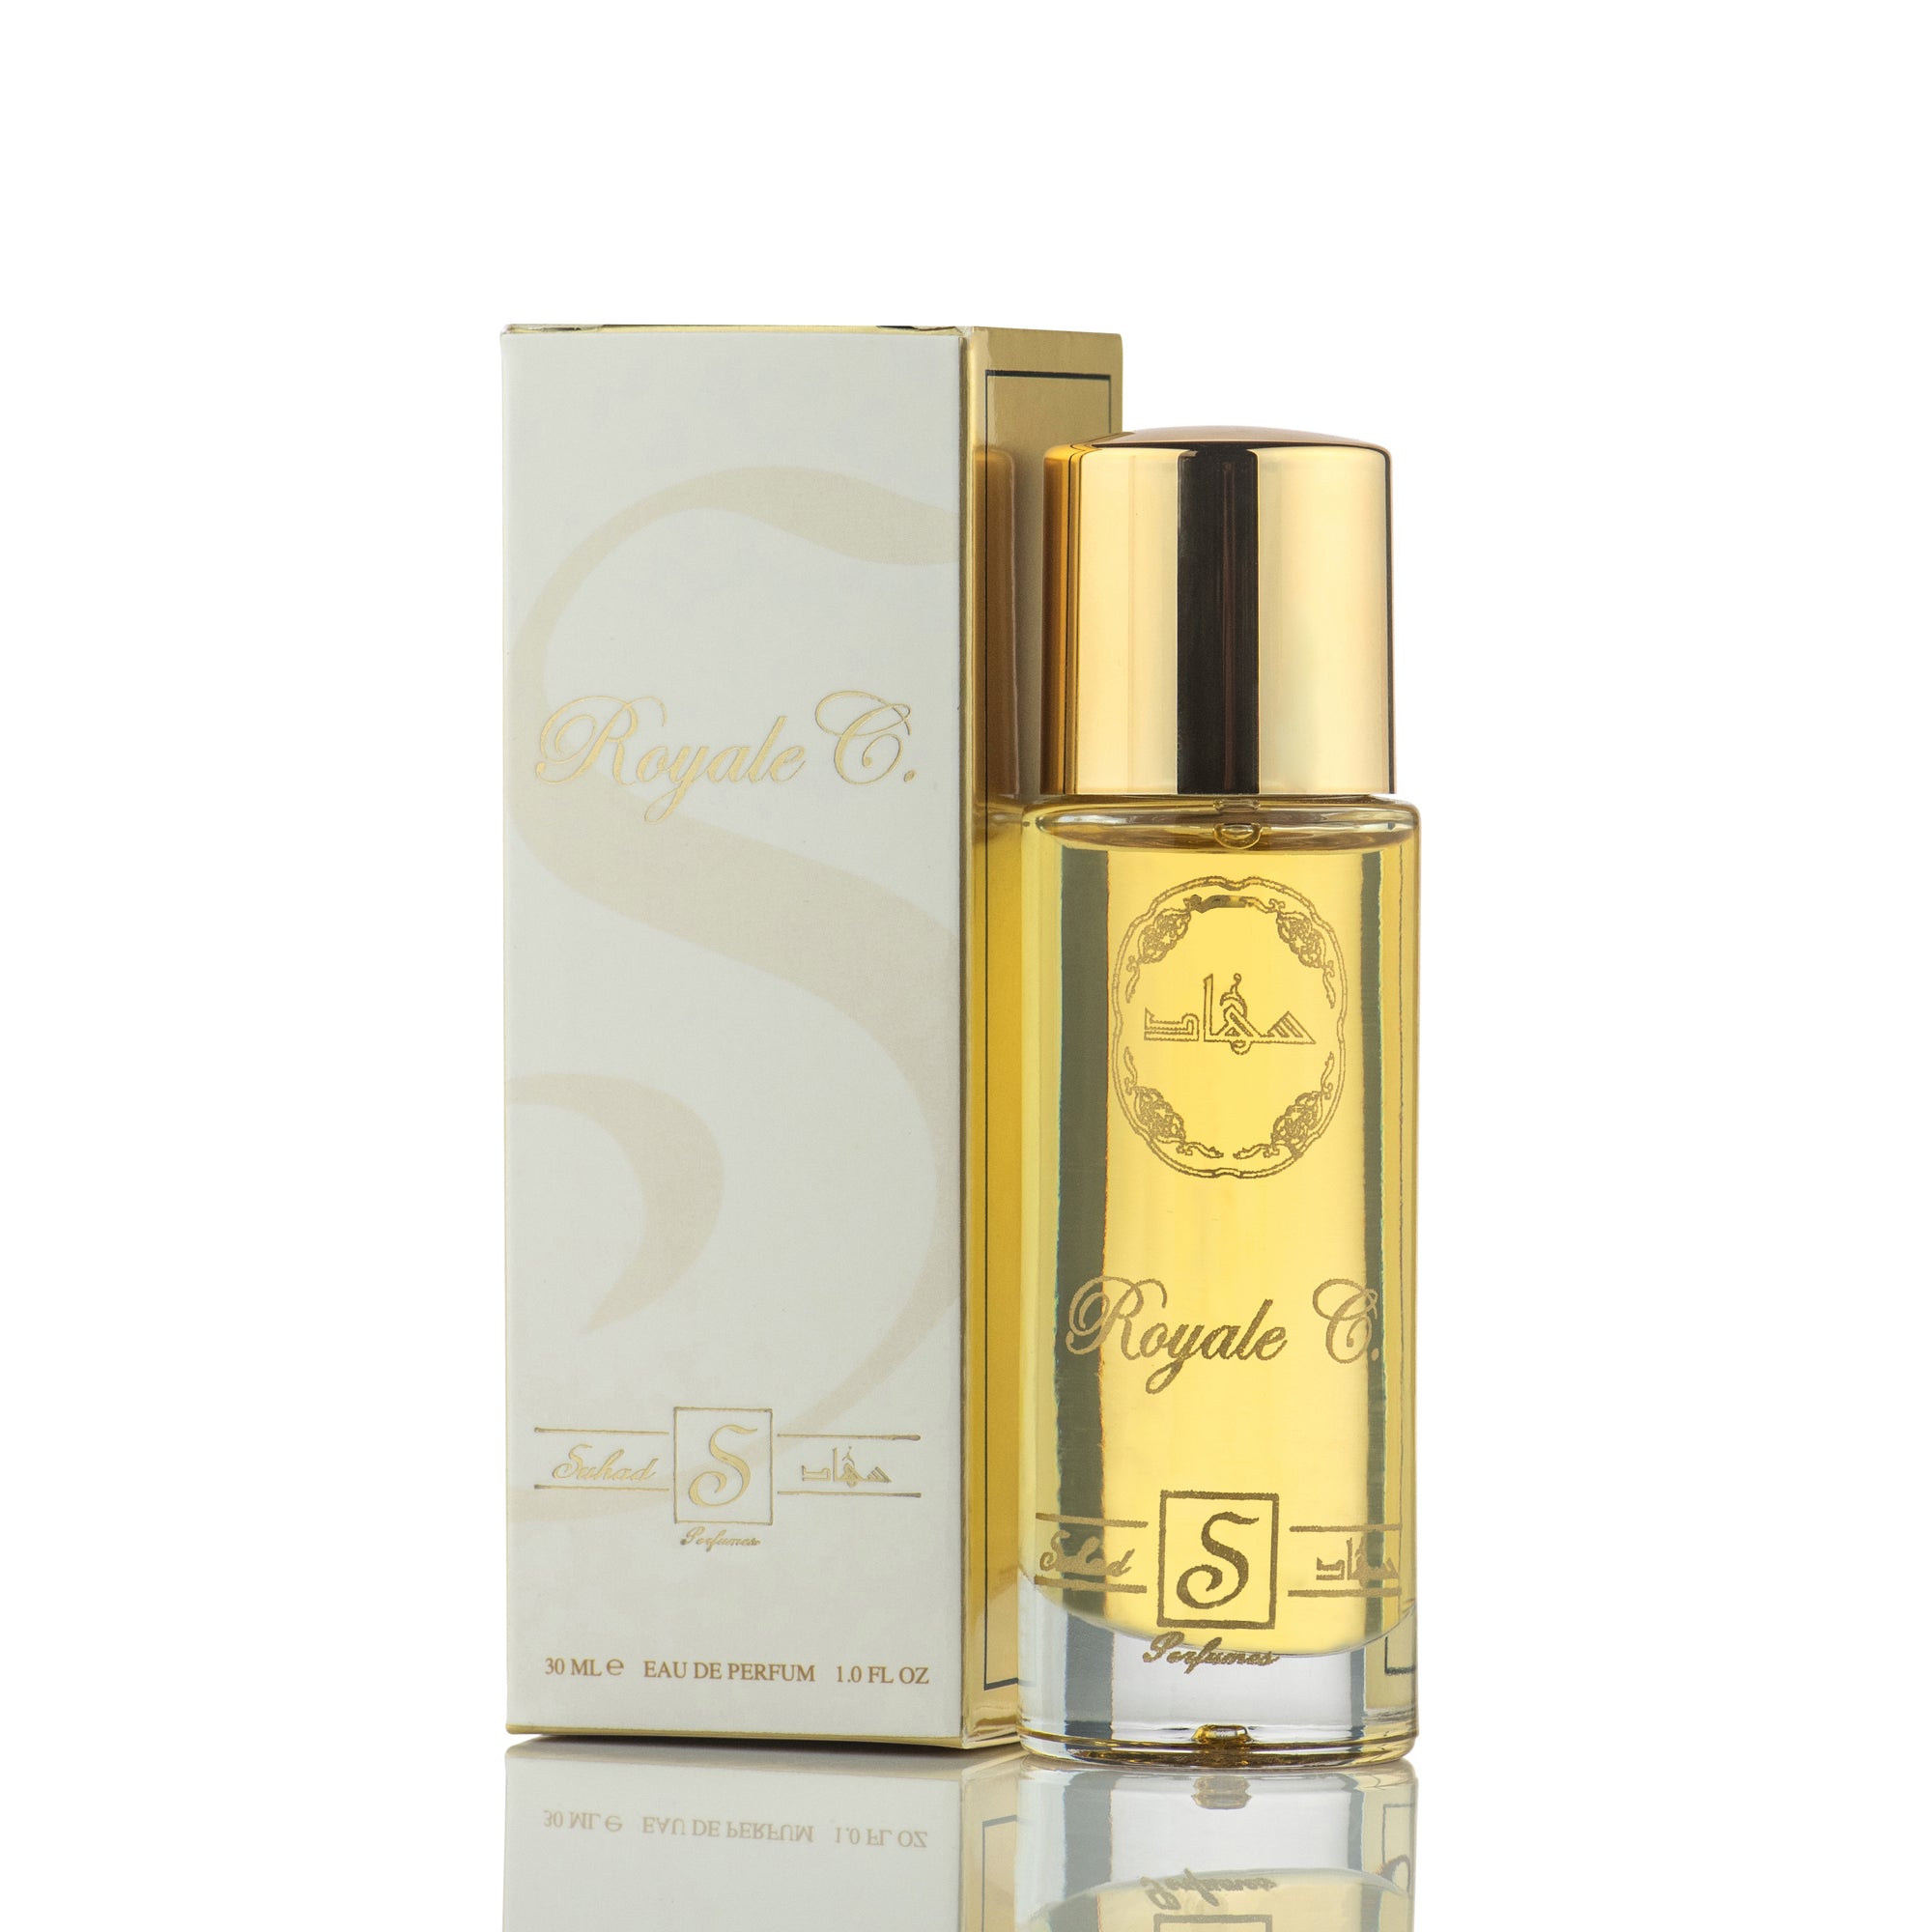 ROYALE C 30ML (Concentrated Body Oil)